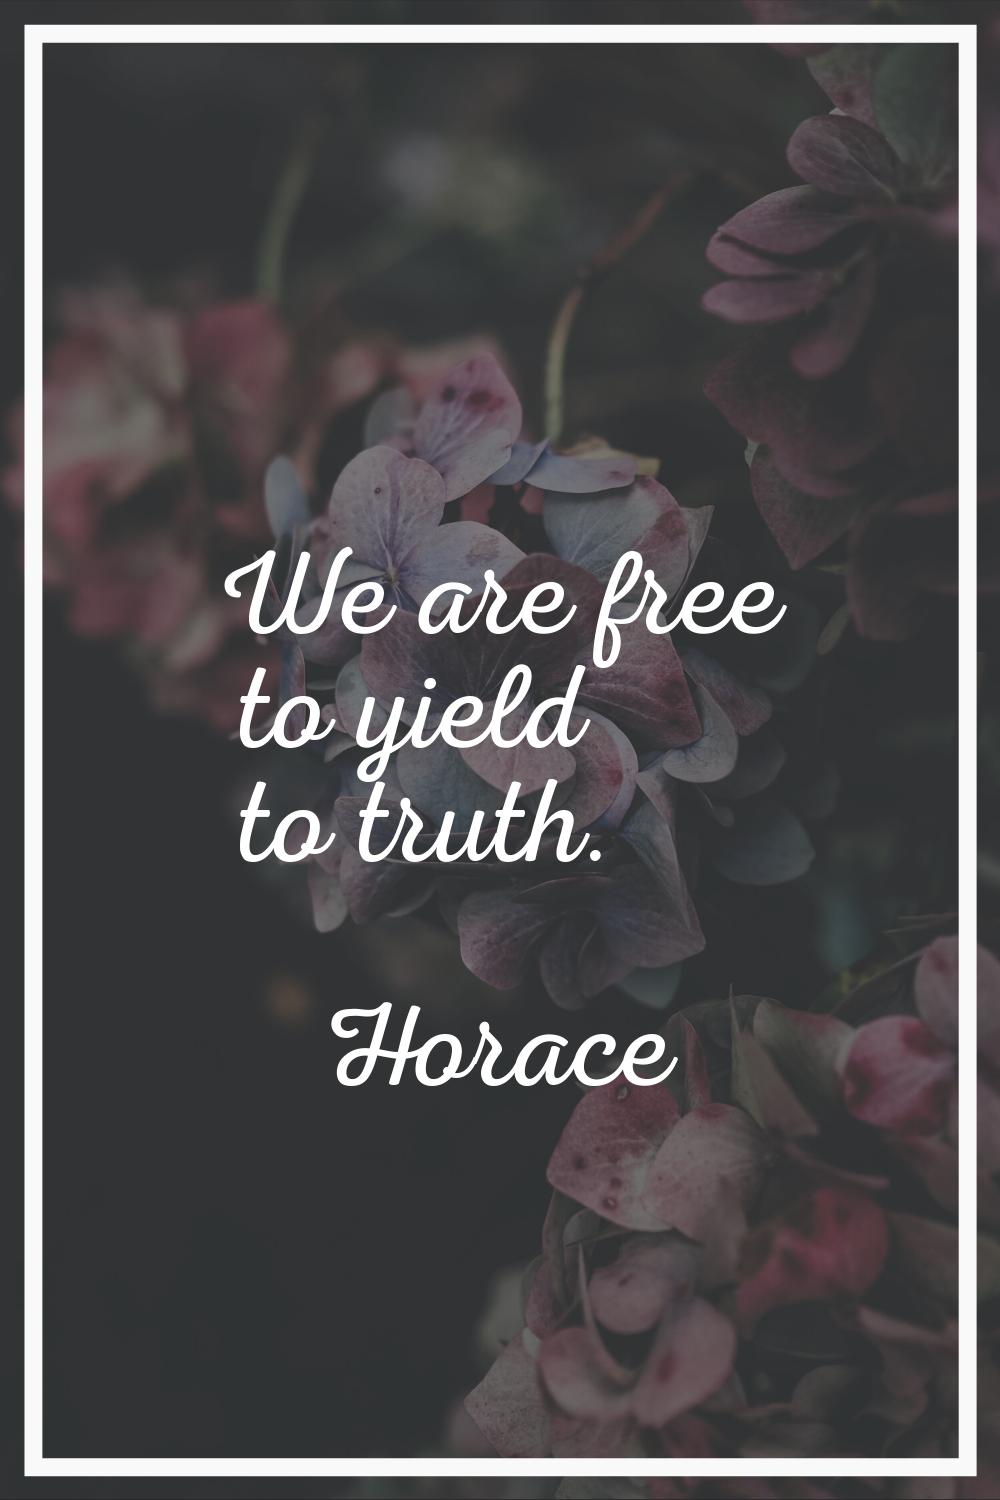 We are free to yield to truth.